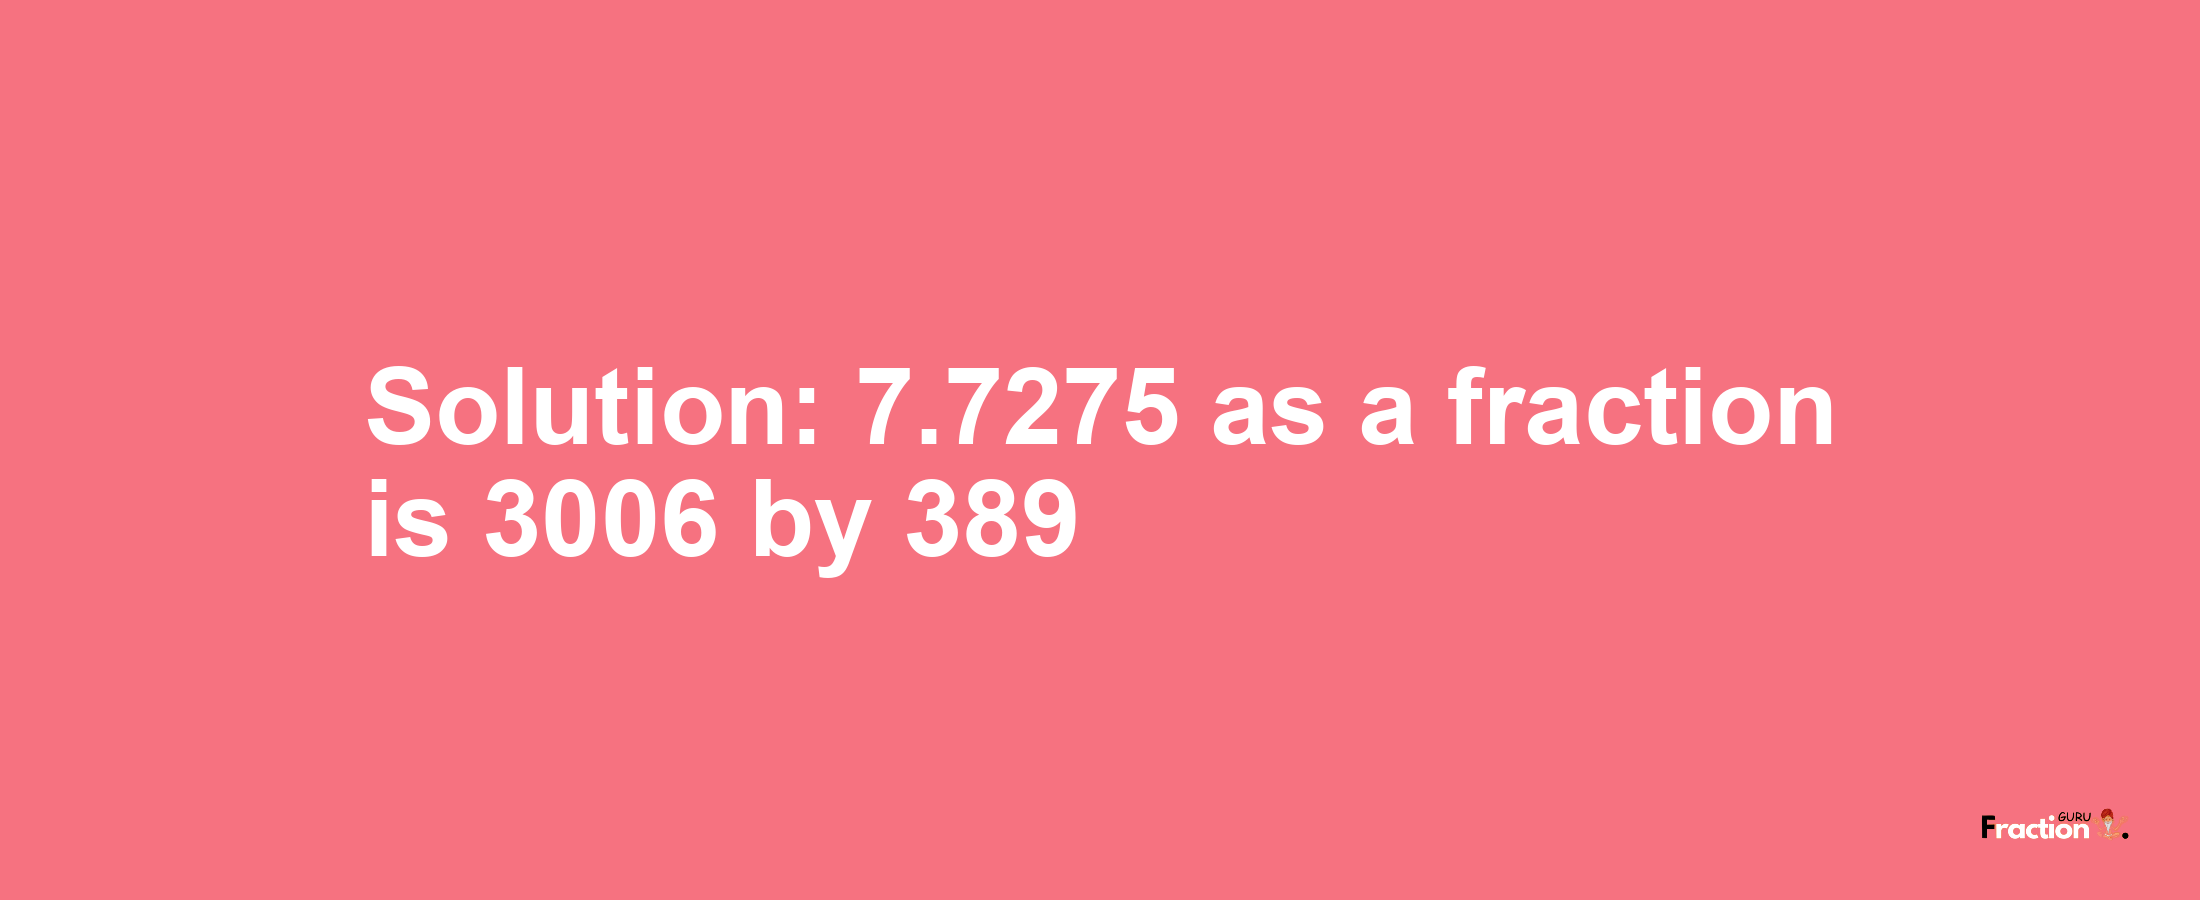 Solution:7.7275 as a fraction is 3006/389